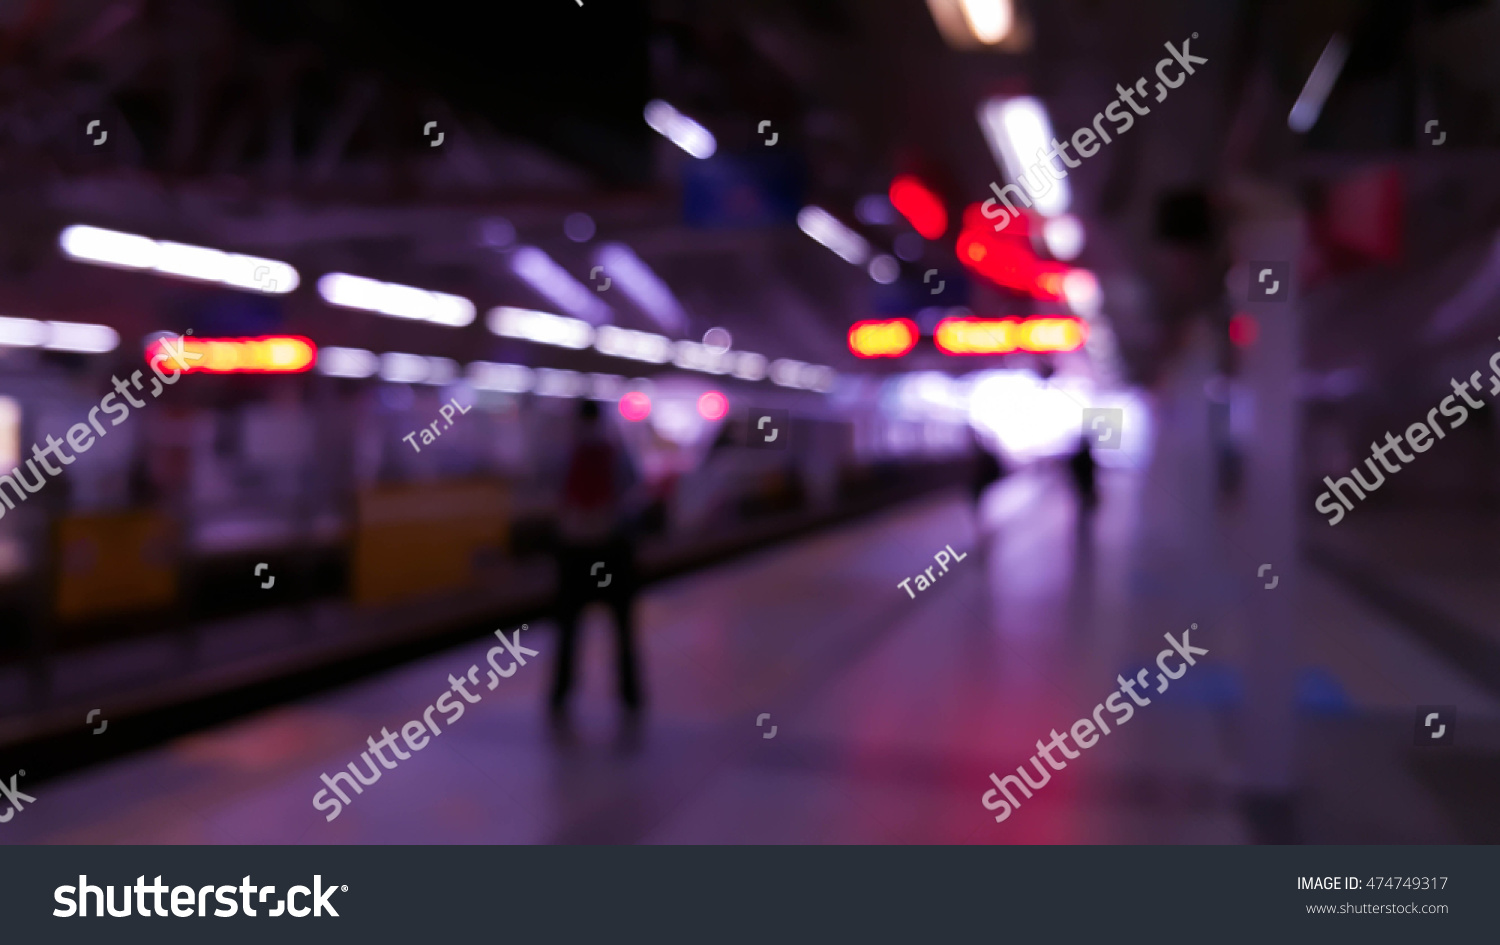 Train Station Kl Sentral Malaysia Blurred Stock Photo Edit Now 474749317